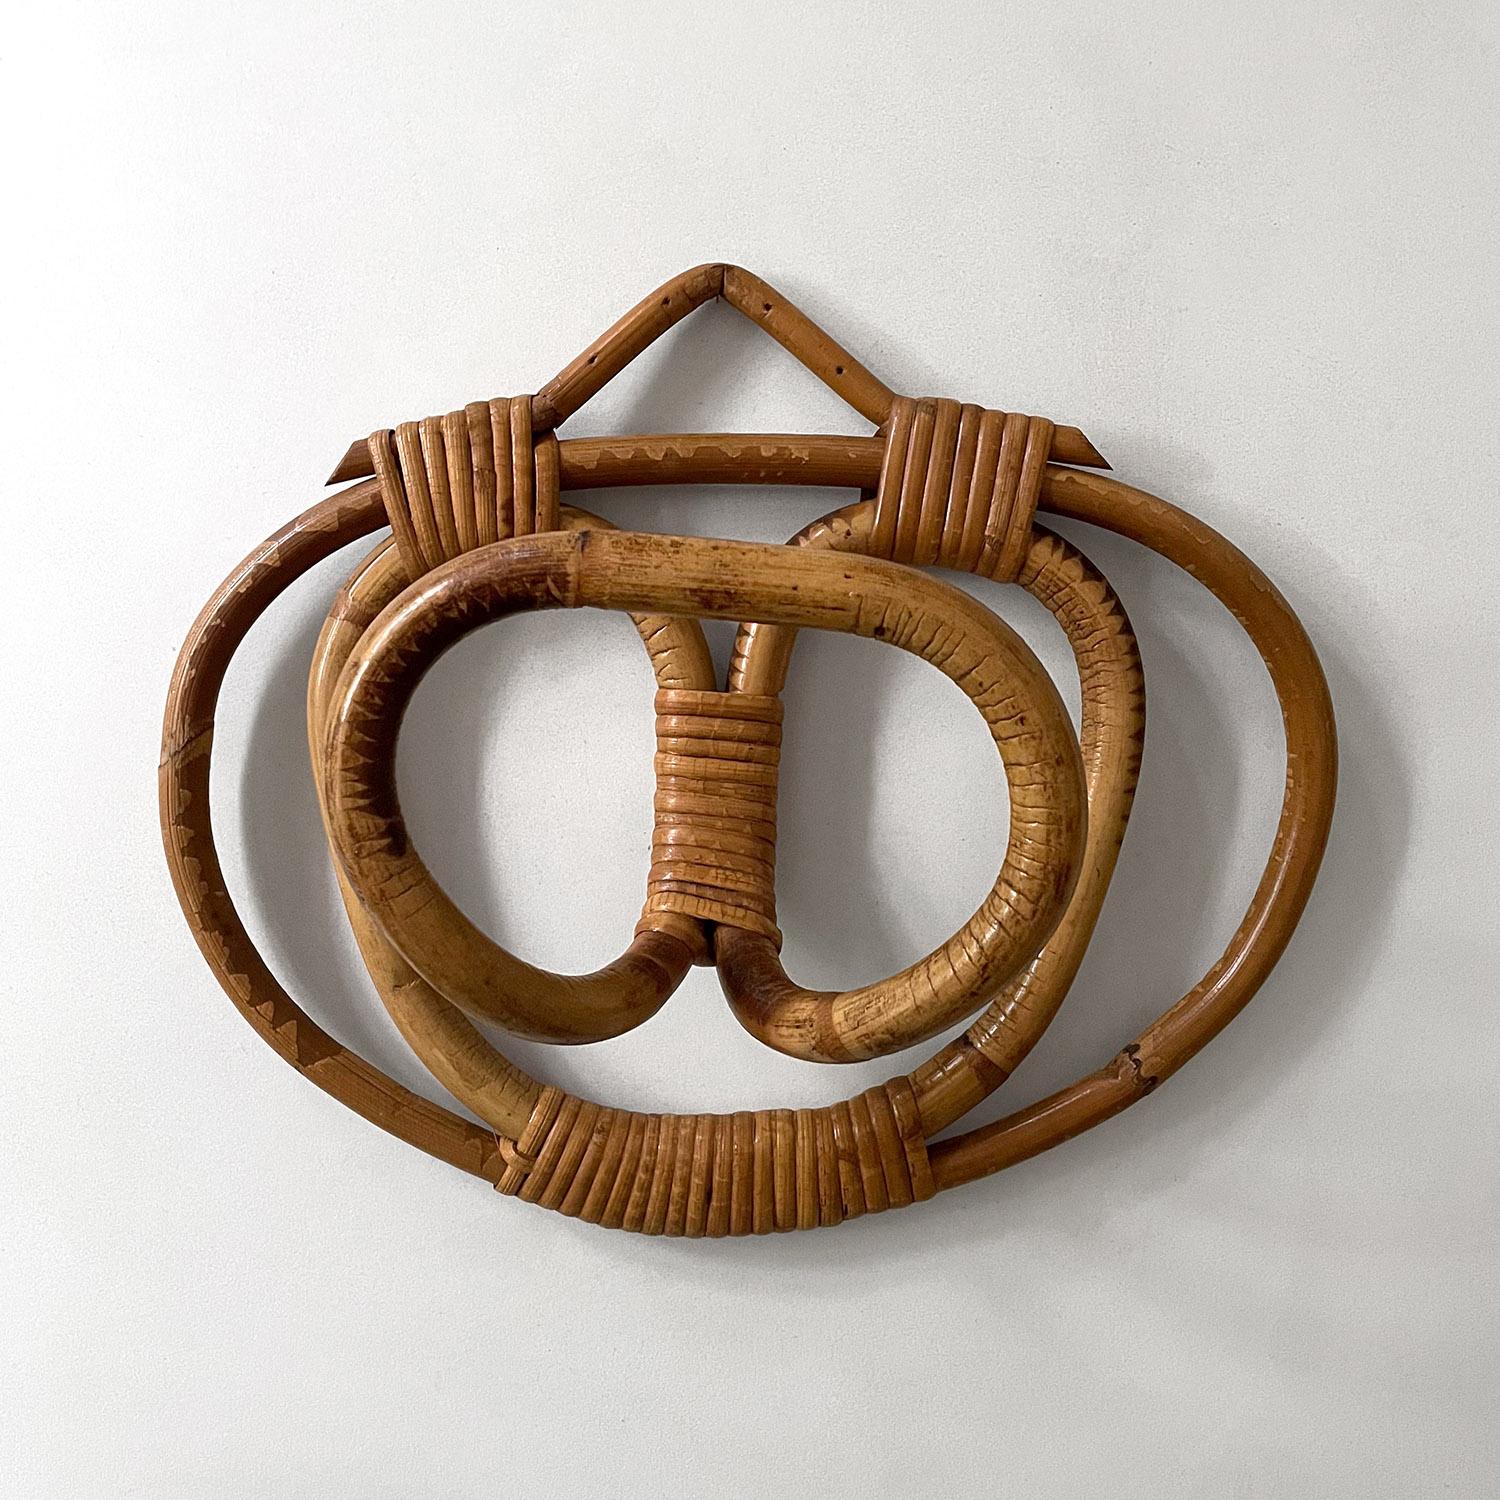 Franco Albini and Franca Helg rattan coat hook
Produced by Bonacina
Italy, circa 1960’s
Oversized rattan coat hook
Natural color variations in the rattan
Hand woven detail
Patina from age and use

Please see other listings for additional Albini-Helg